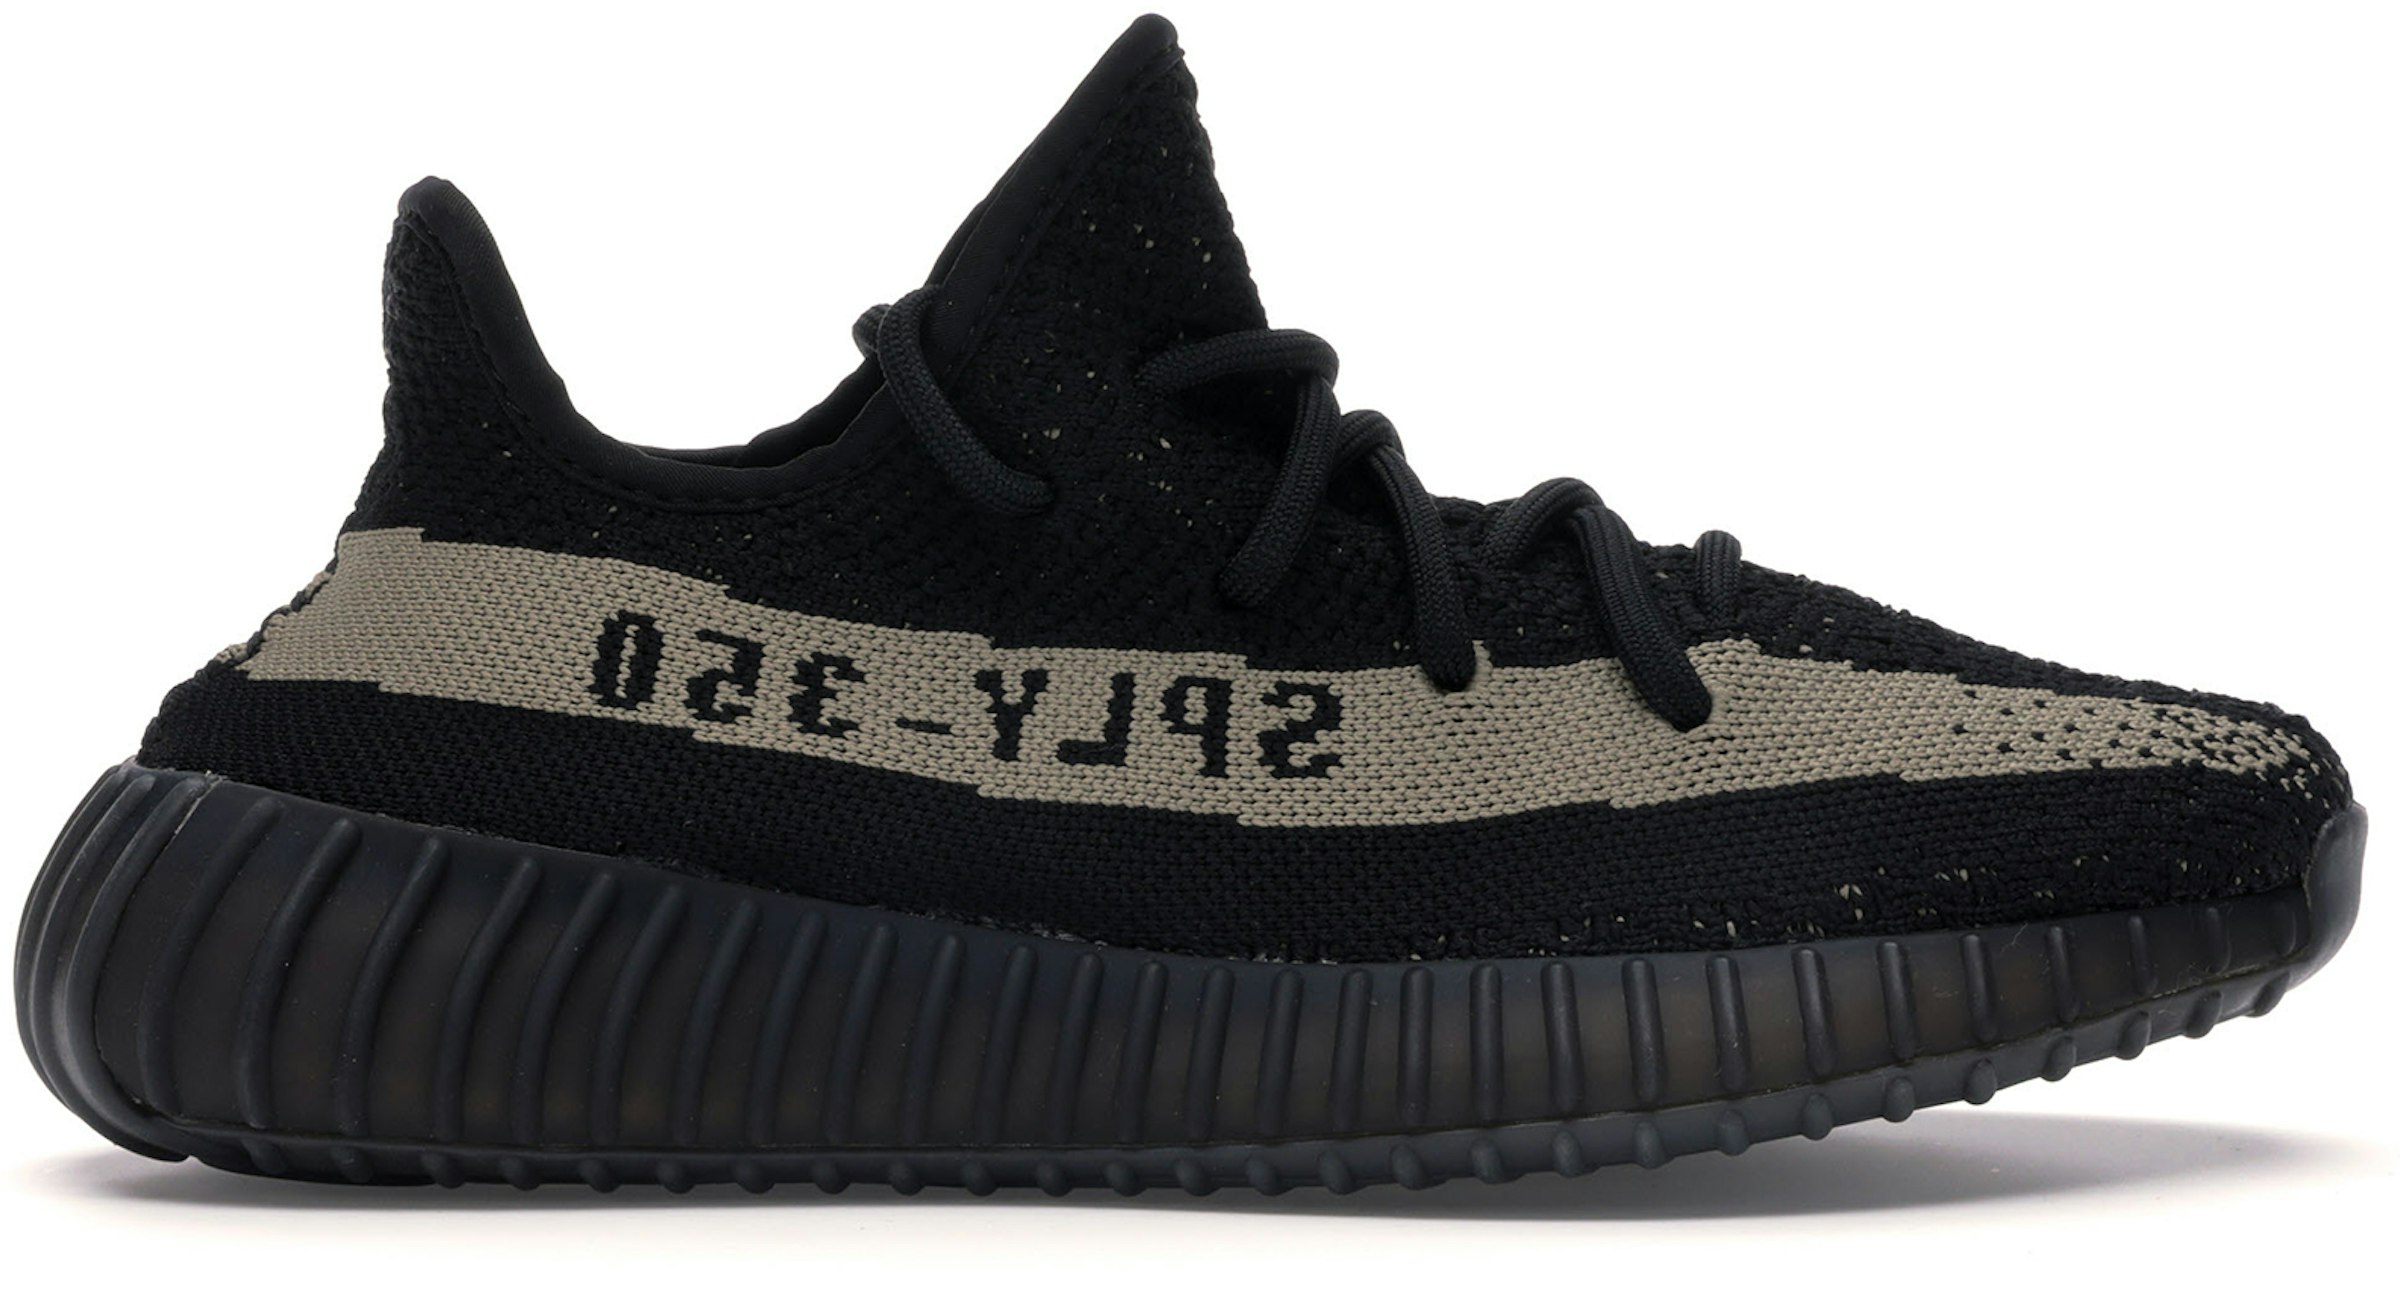 adidas Boost 350 V2 Core Black Green Men's - BY9611 - US